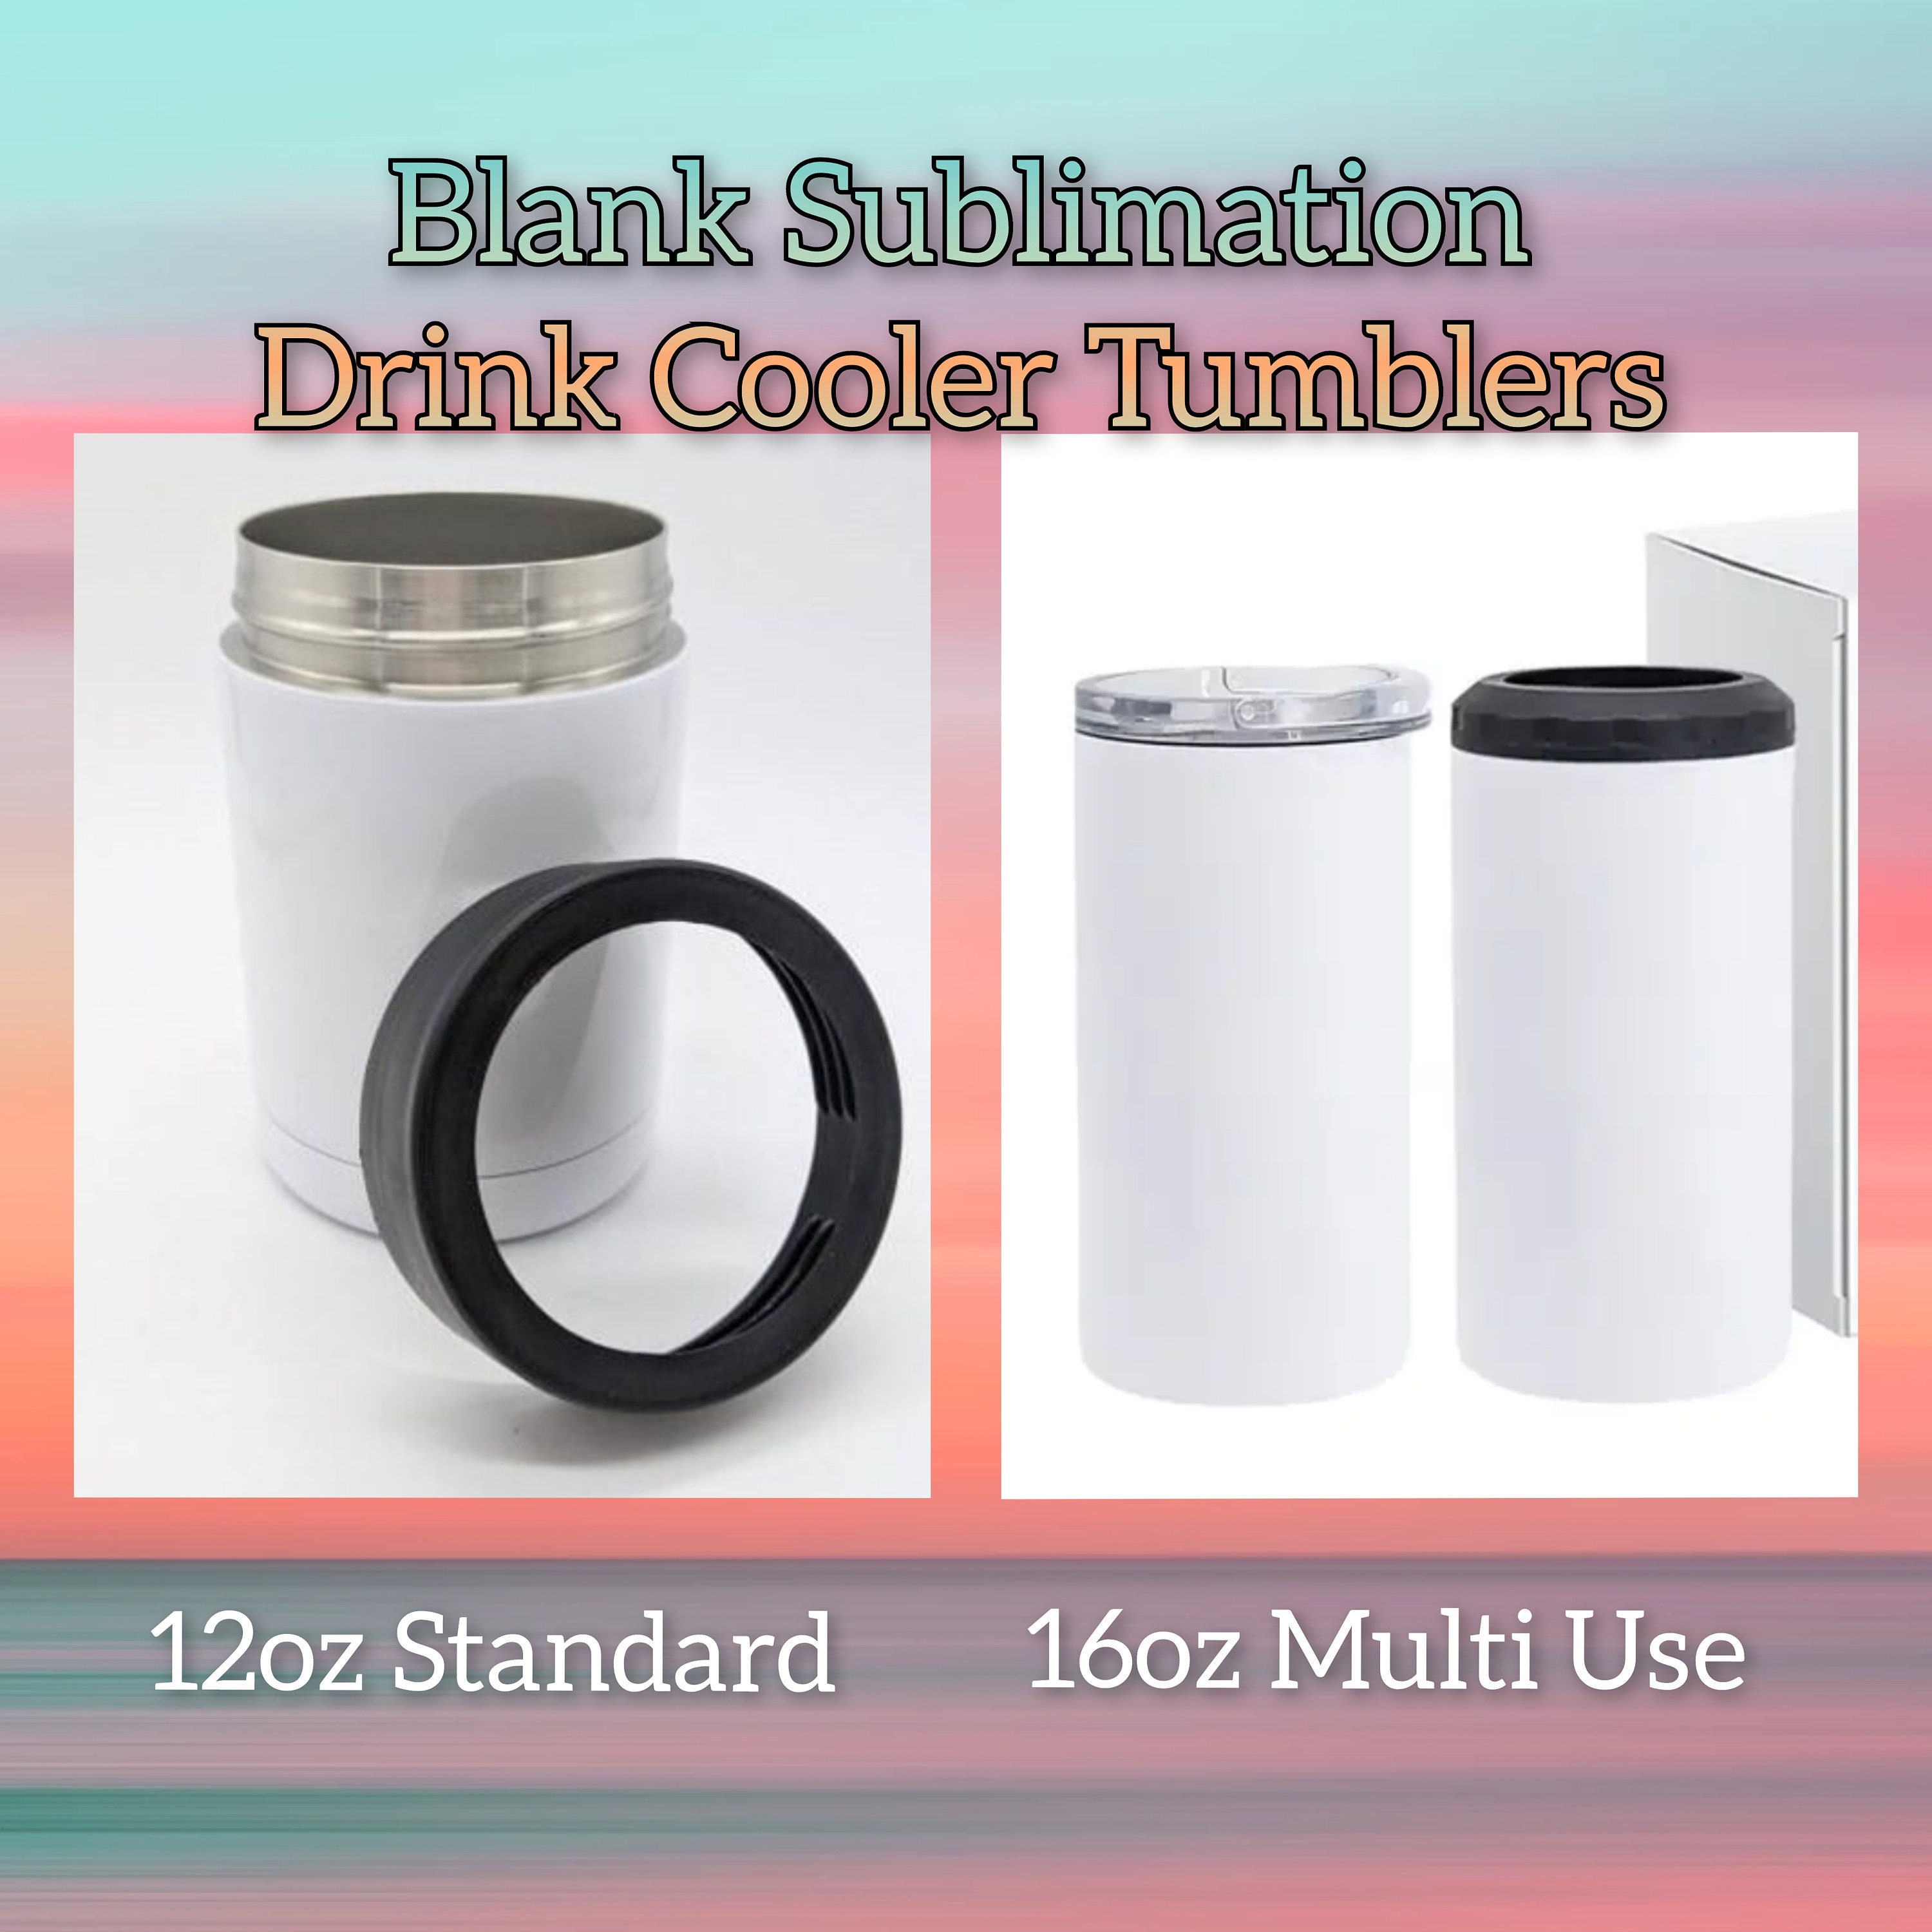 4 in 1 CAN COOLER  SUBLIMATION TUMBLER – Avenue 75 Products, Services &  Design